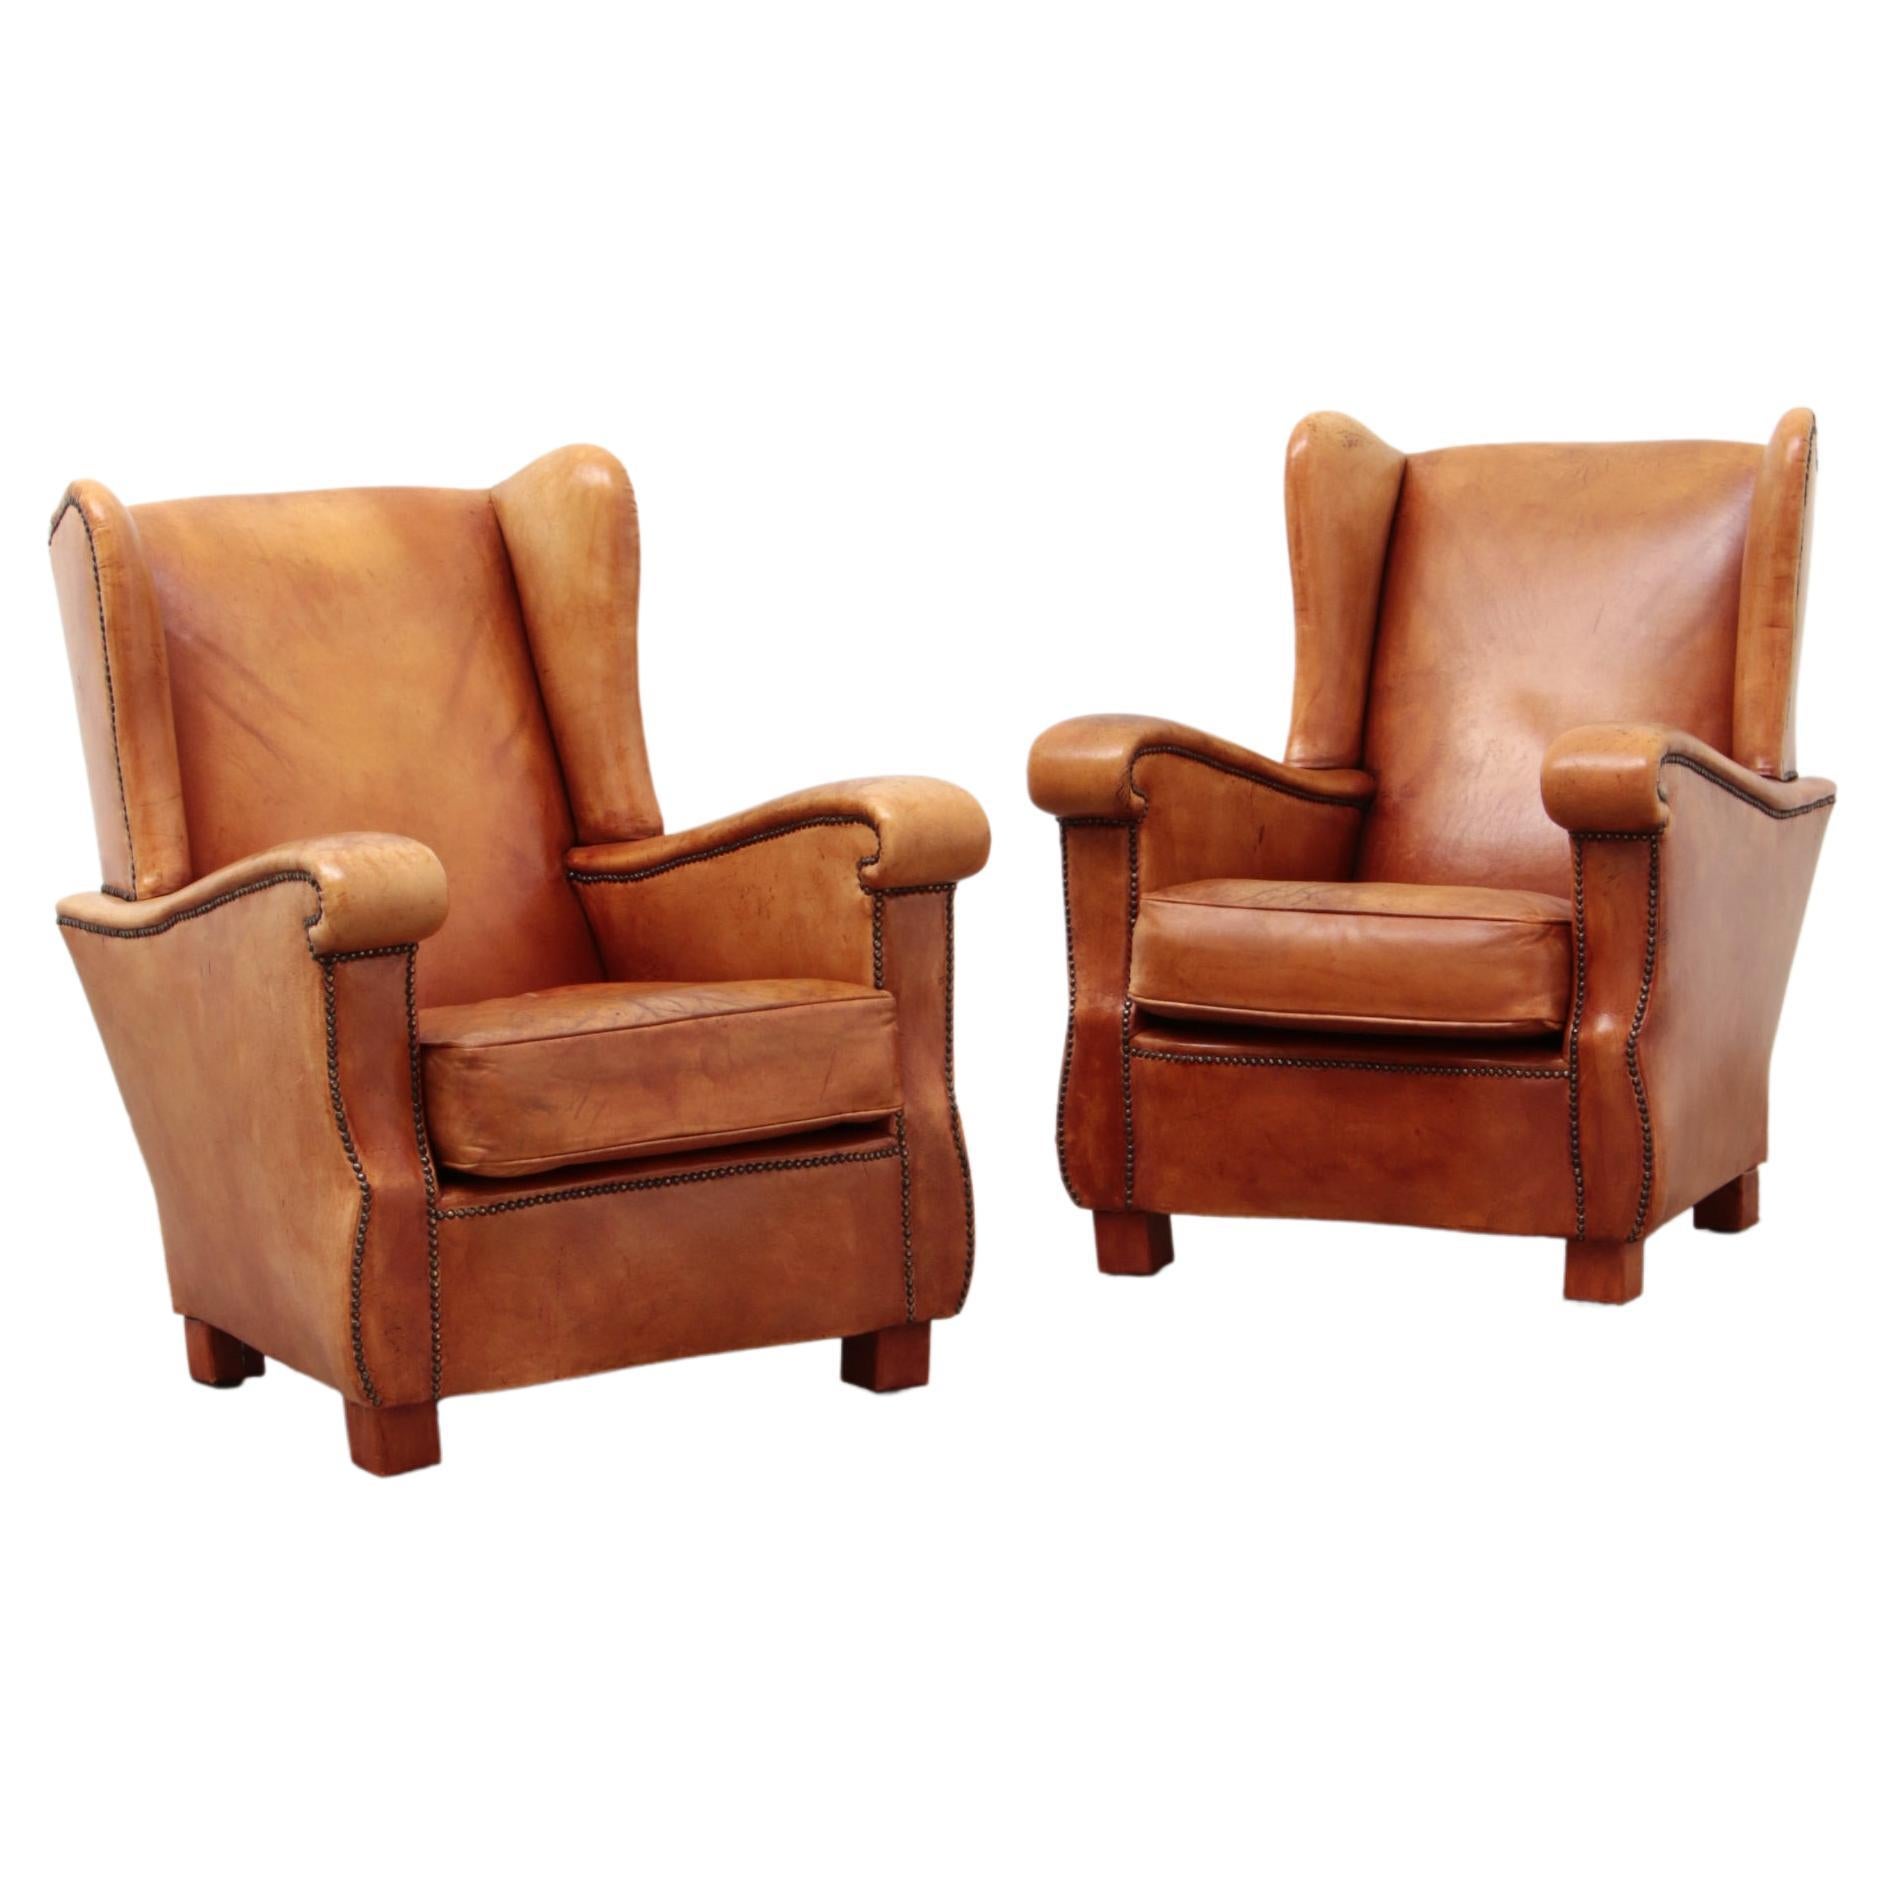 Set of Two Sheepskin Leather Armchairs, 1970, Netherlands